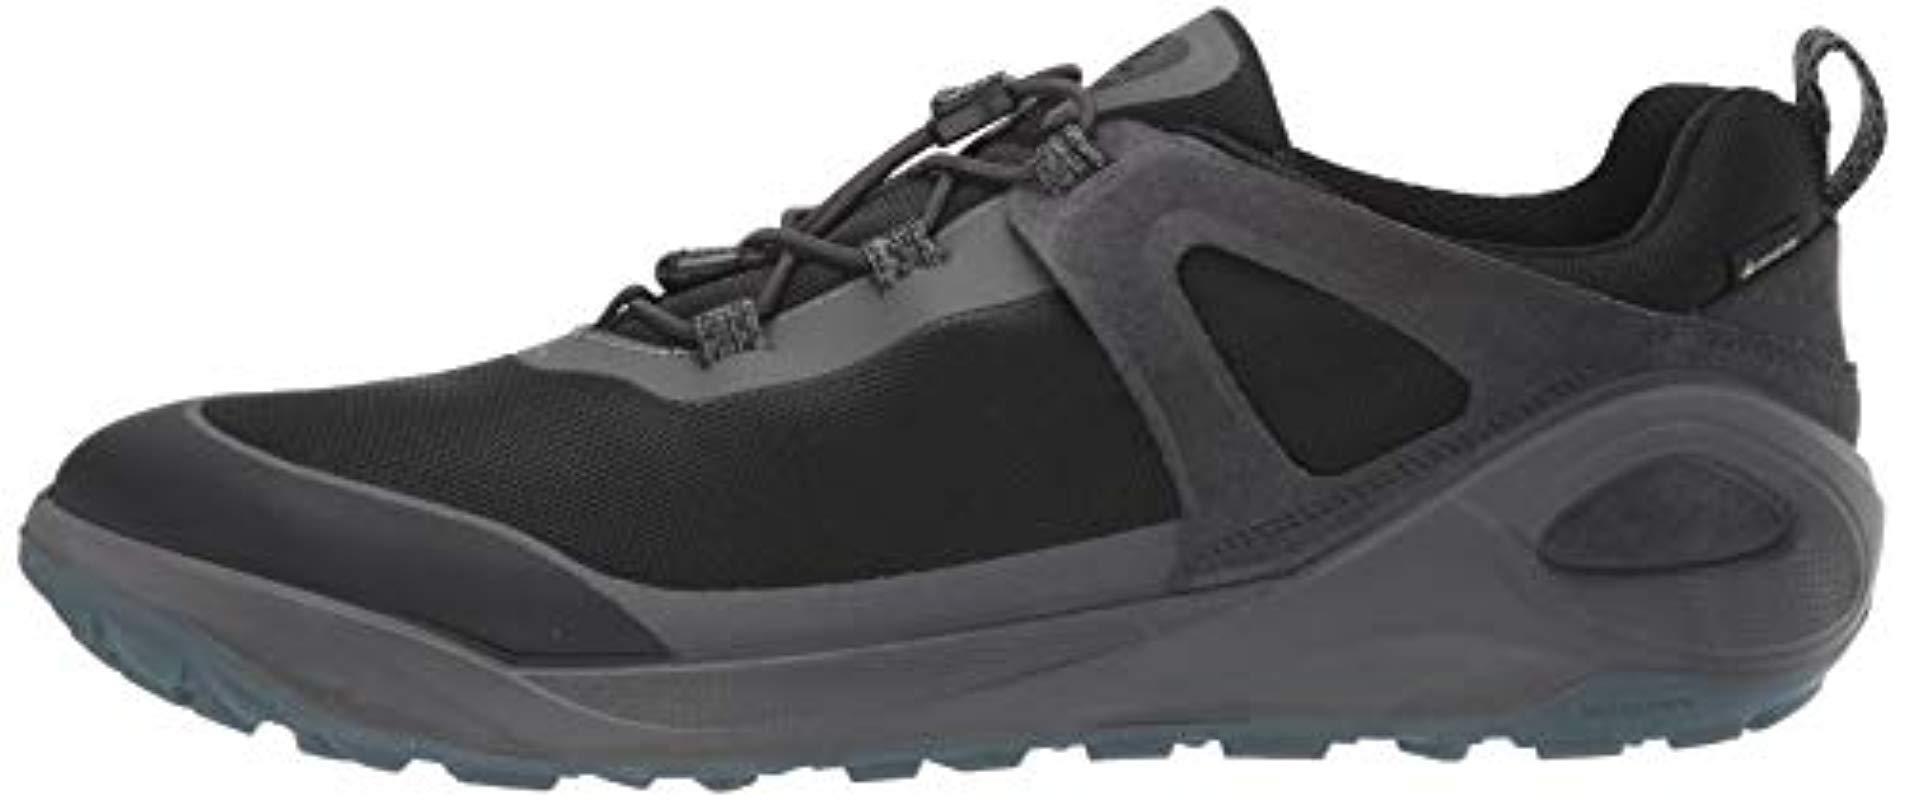 Ecco Biom 2go Speed Lace in Black for Men - Save 1% - Lyst